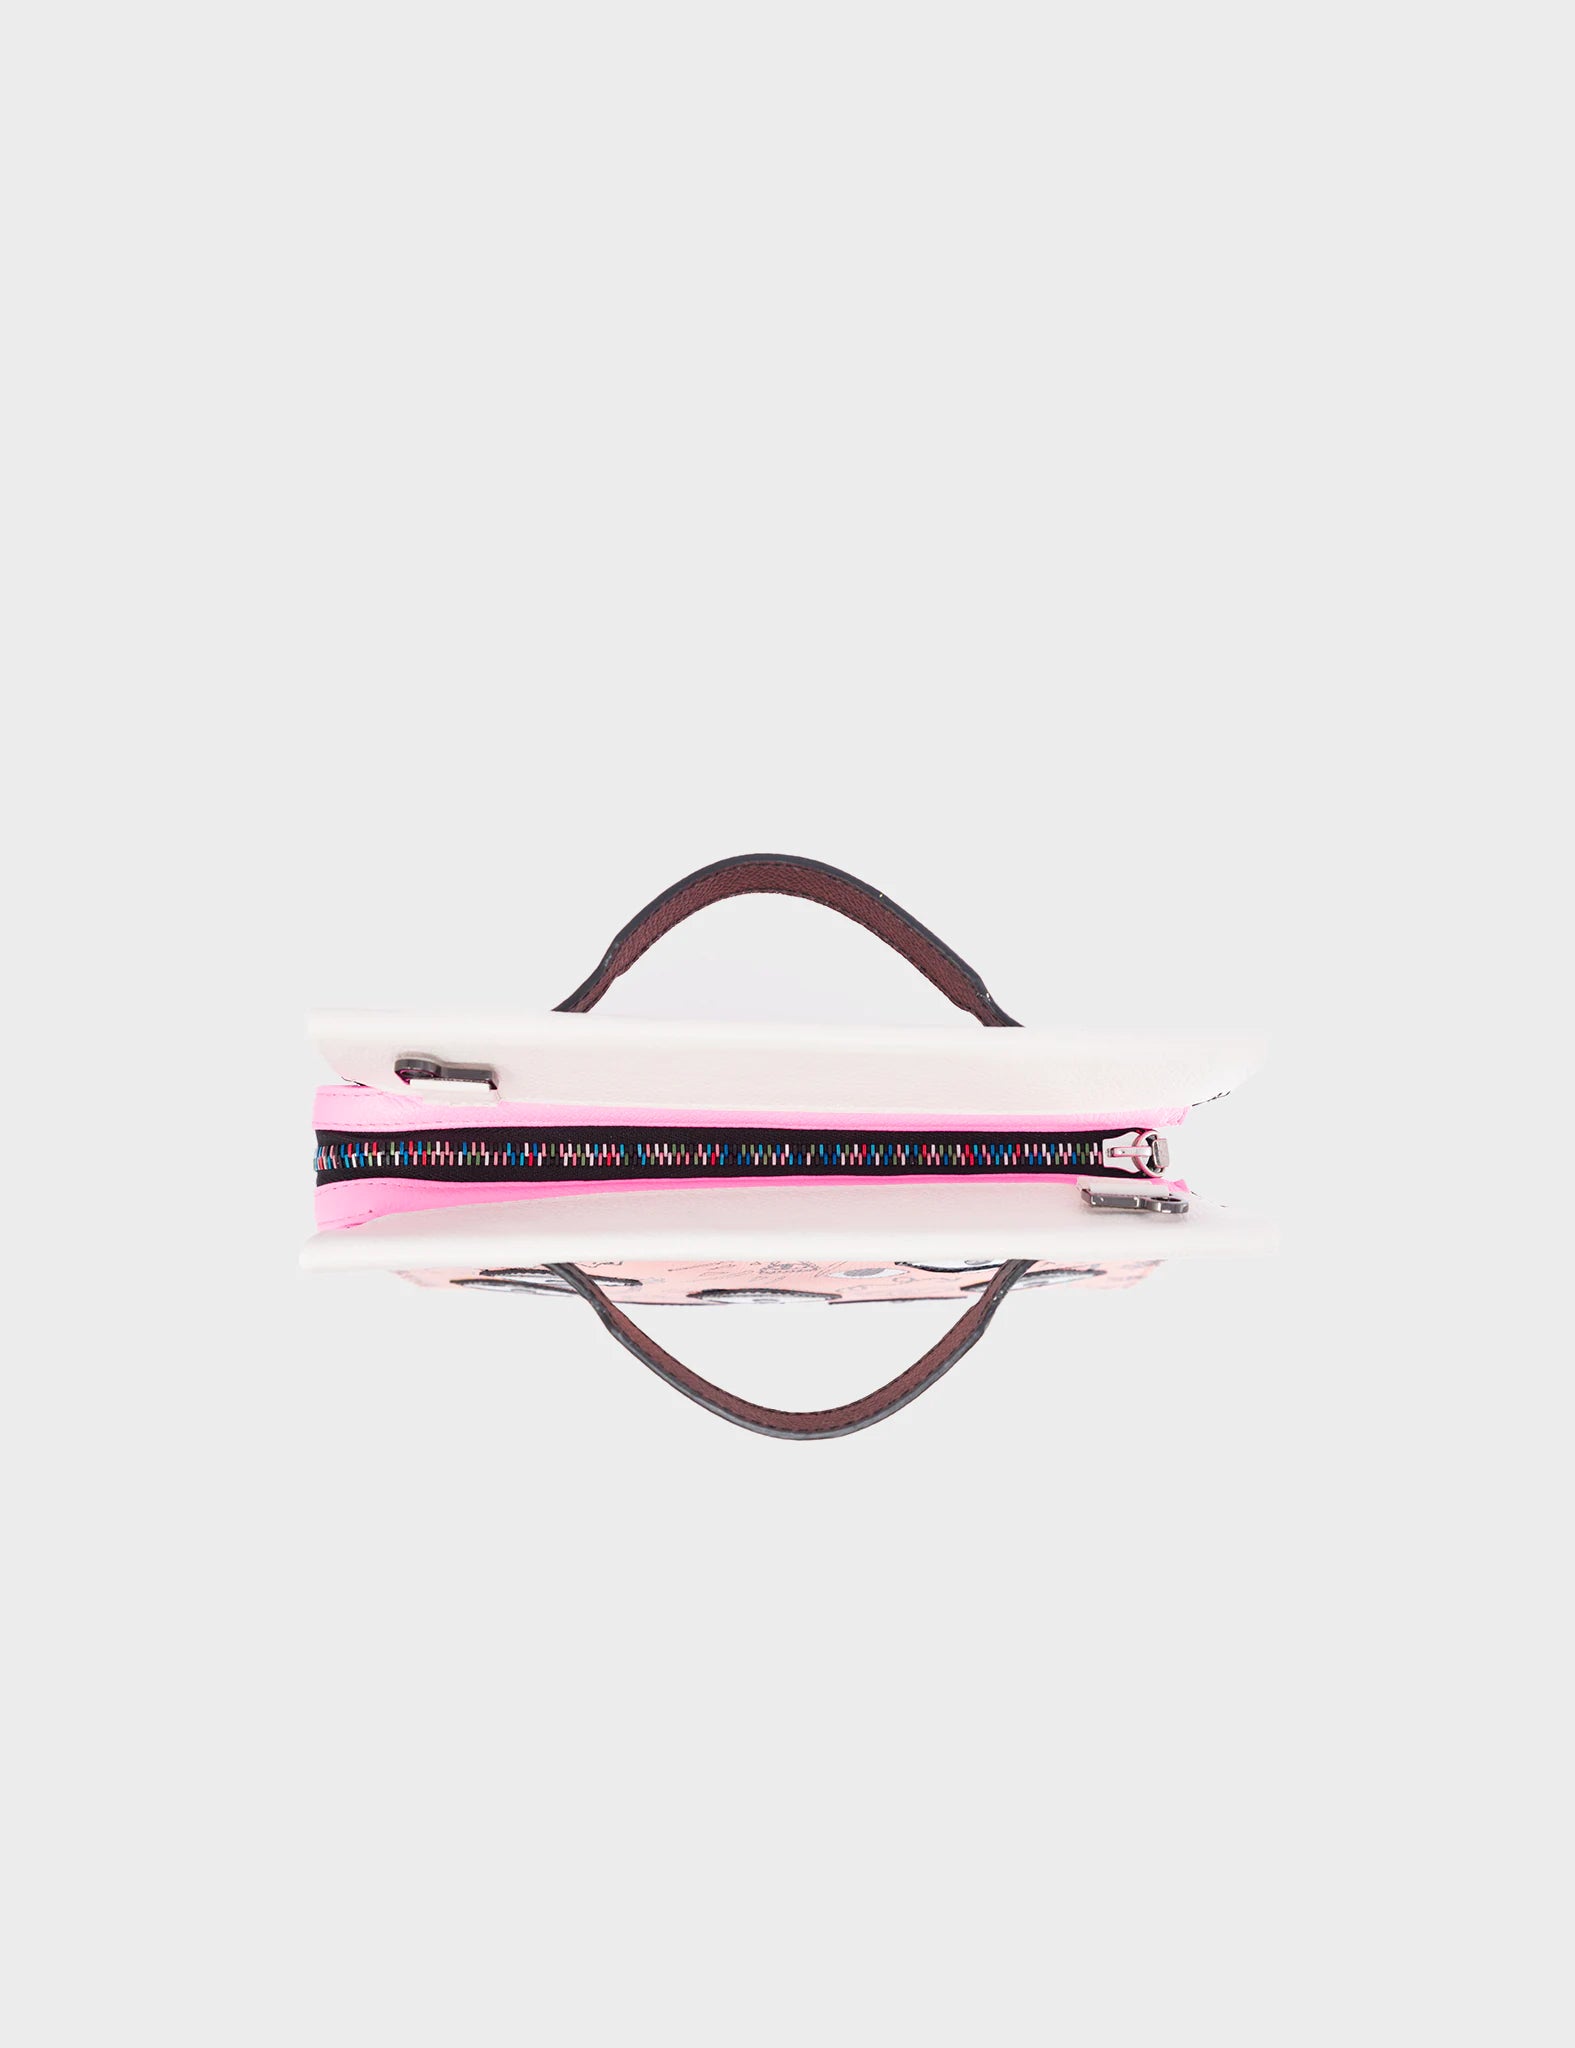 Vali Crossbody Small Rosa Leather Bag - Urban Doodles Print and Eyes Applique - Top View